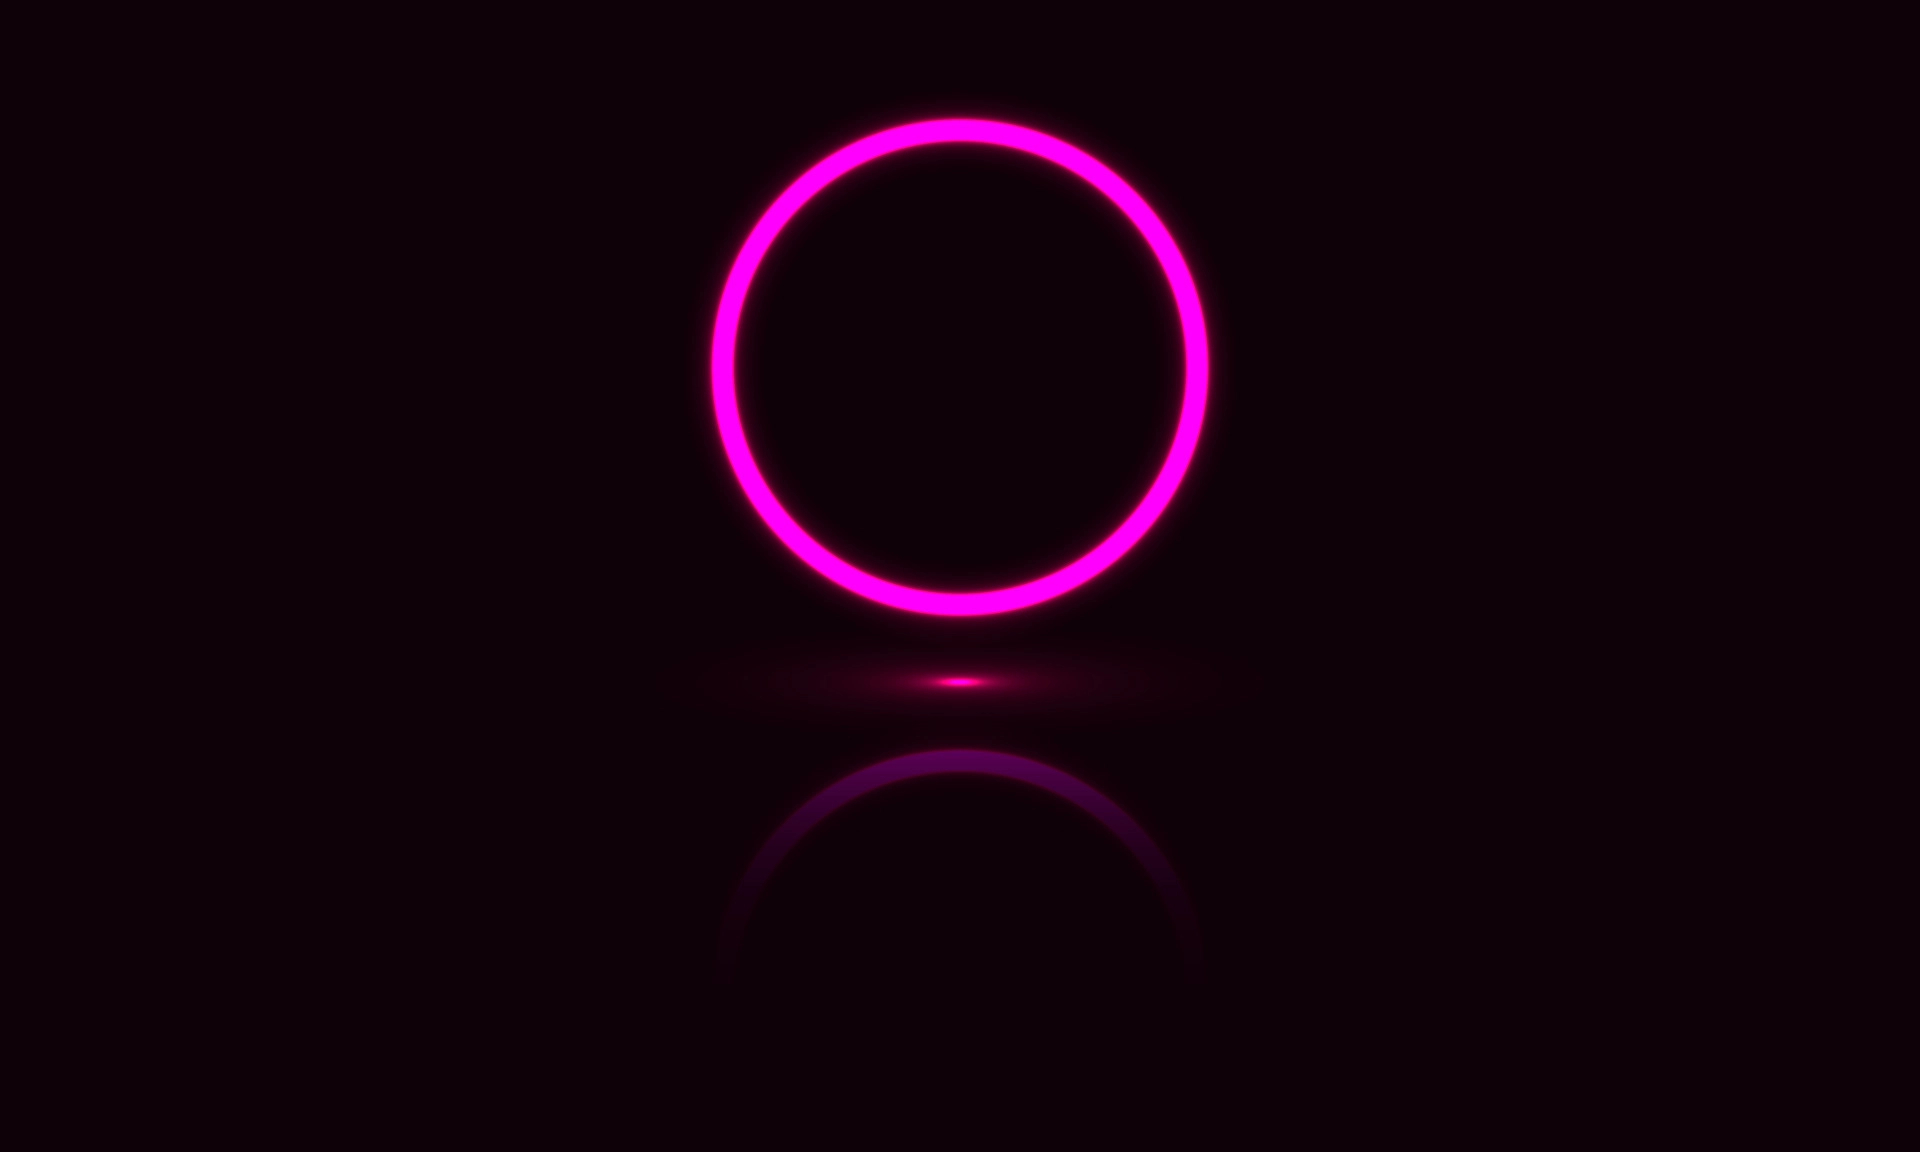 1920x1152 Futuristic Sci-Fi Abstract Neon Pink Light Shapes On Black Background. Exclusive wallpaper design for poster, brochure, presentation, website etc. 5592270 Vector Art